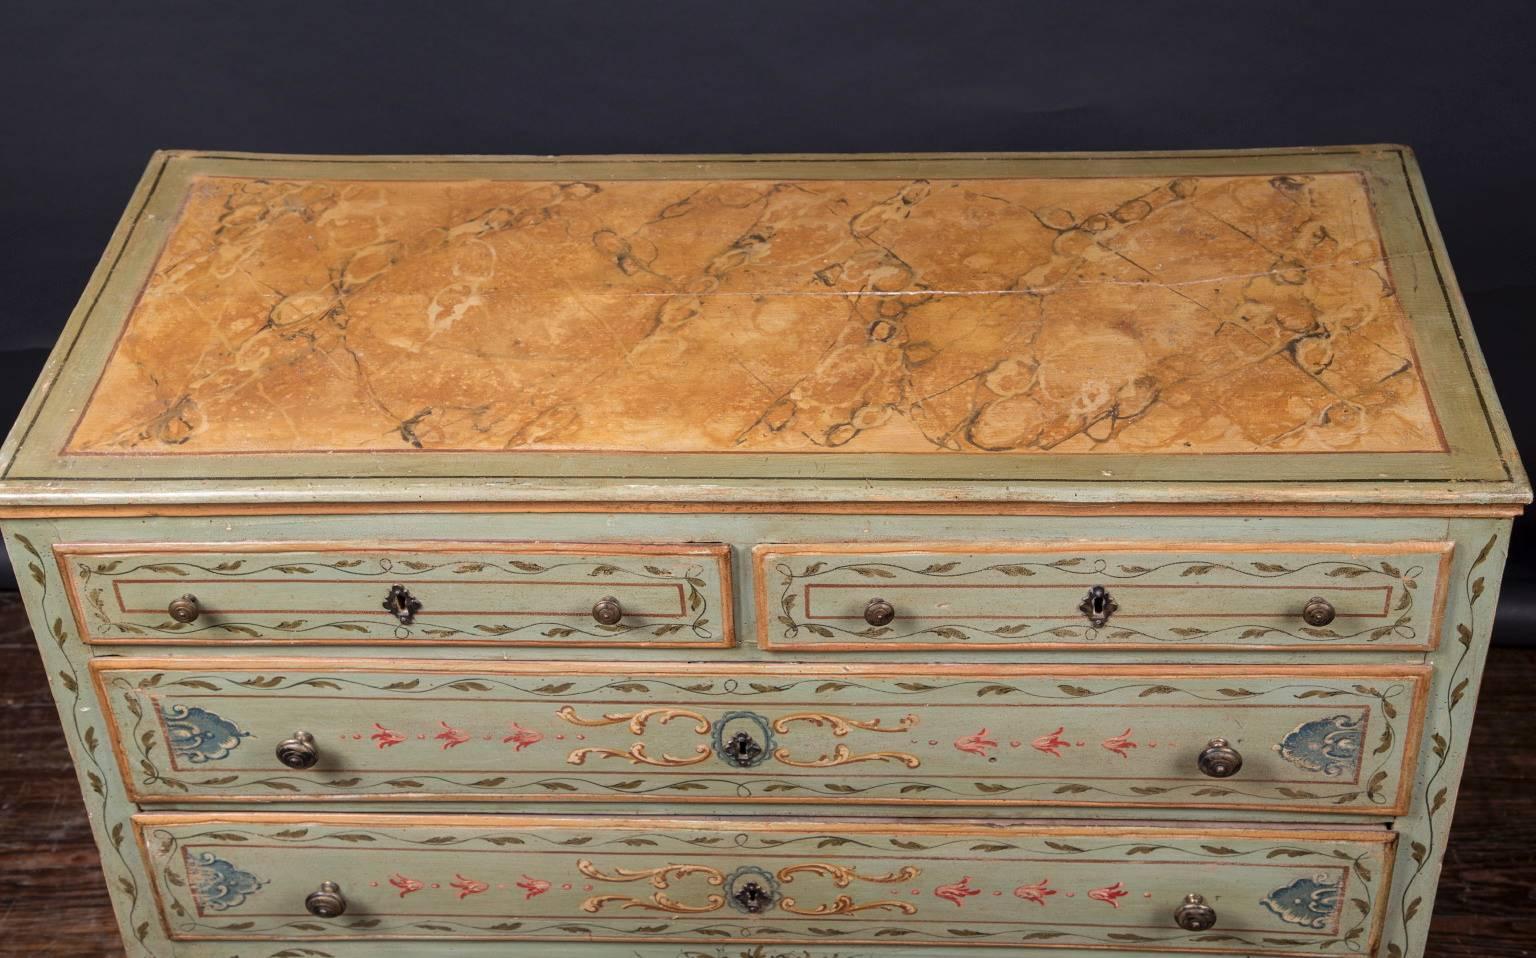 This beautiful Louis XV style painted chest features bronze knobs and escutcheons on each of four drawers.  The Italian antique chest dates back to the 19th century and is painted in a floriate design on front and sides, trimmed with gold edging,